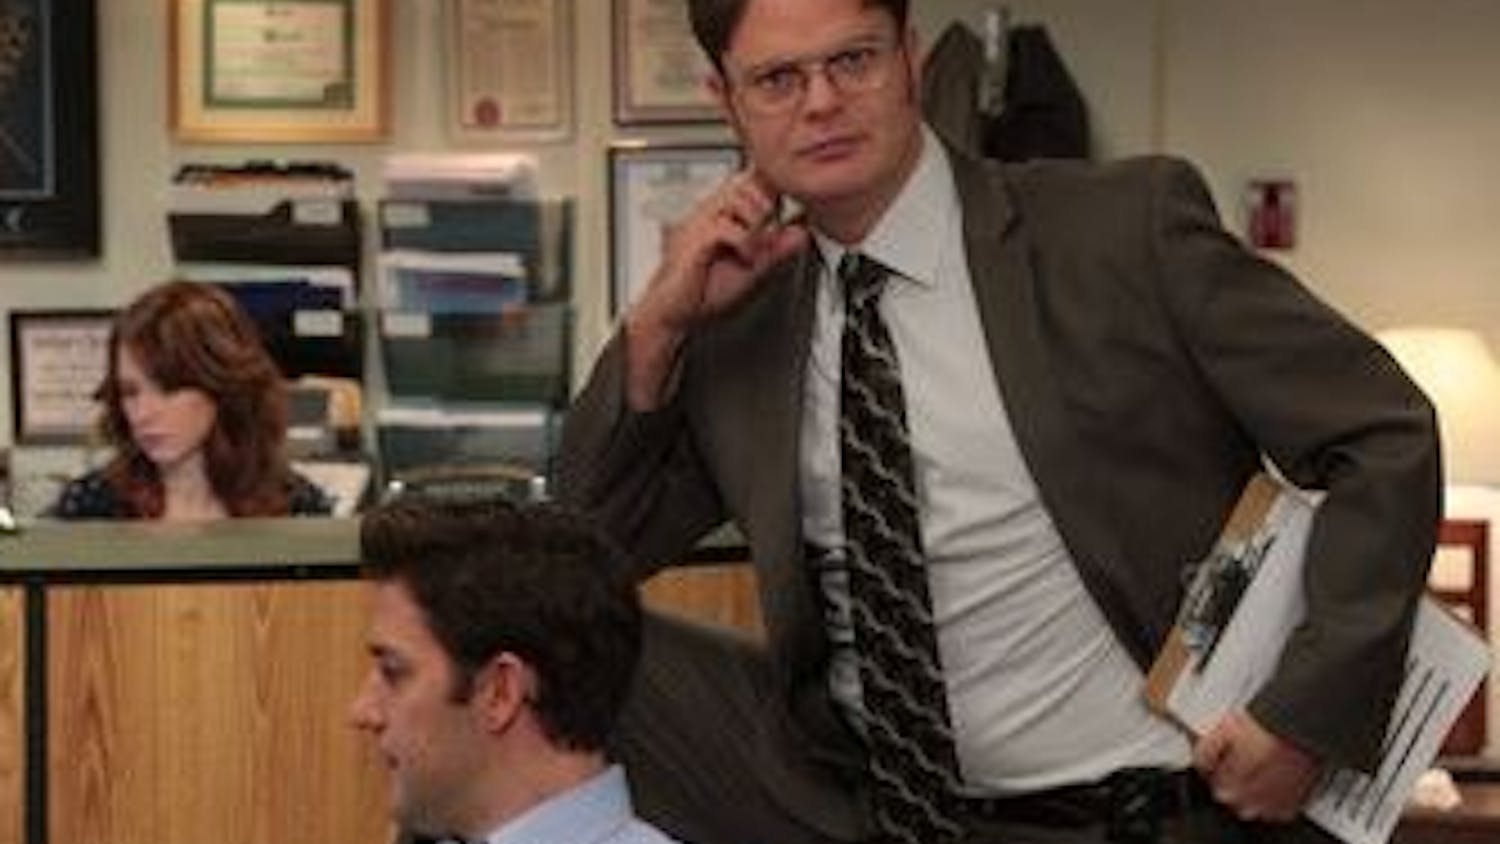 Dwight Schrute, as played by Rainn Wilson, is the heart-breaker of "The Office," with dreamy&nbsp;eyes and a stylish middle part.